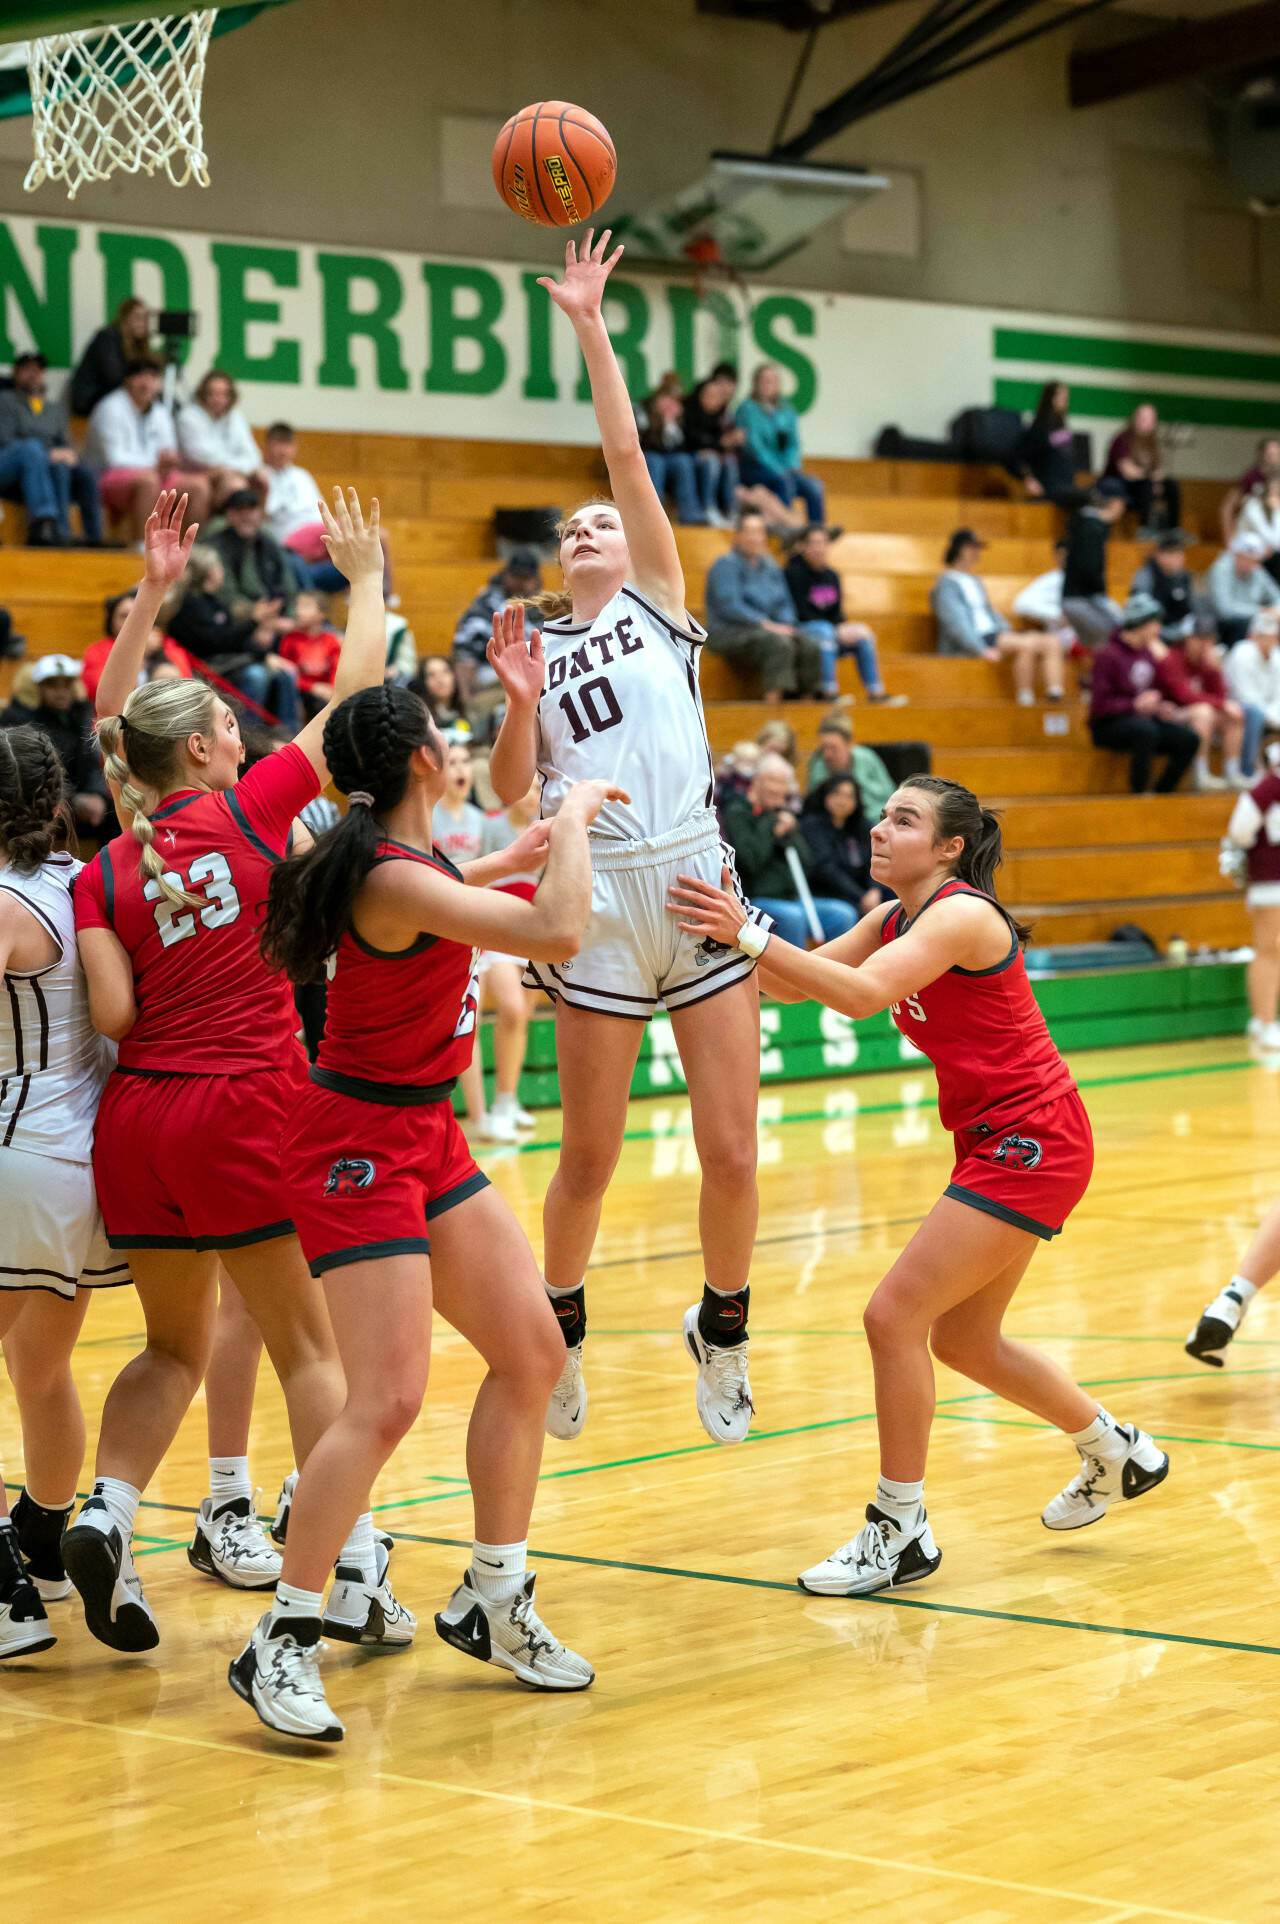 PHOTO BY FOREST WORGUM Montesano’s Mikayla Stanfield (10) puts up a shot during a 51-37 loss to King’s in a 1A State Tournament game on Saturday at Tumwater High School.